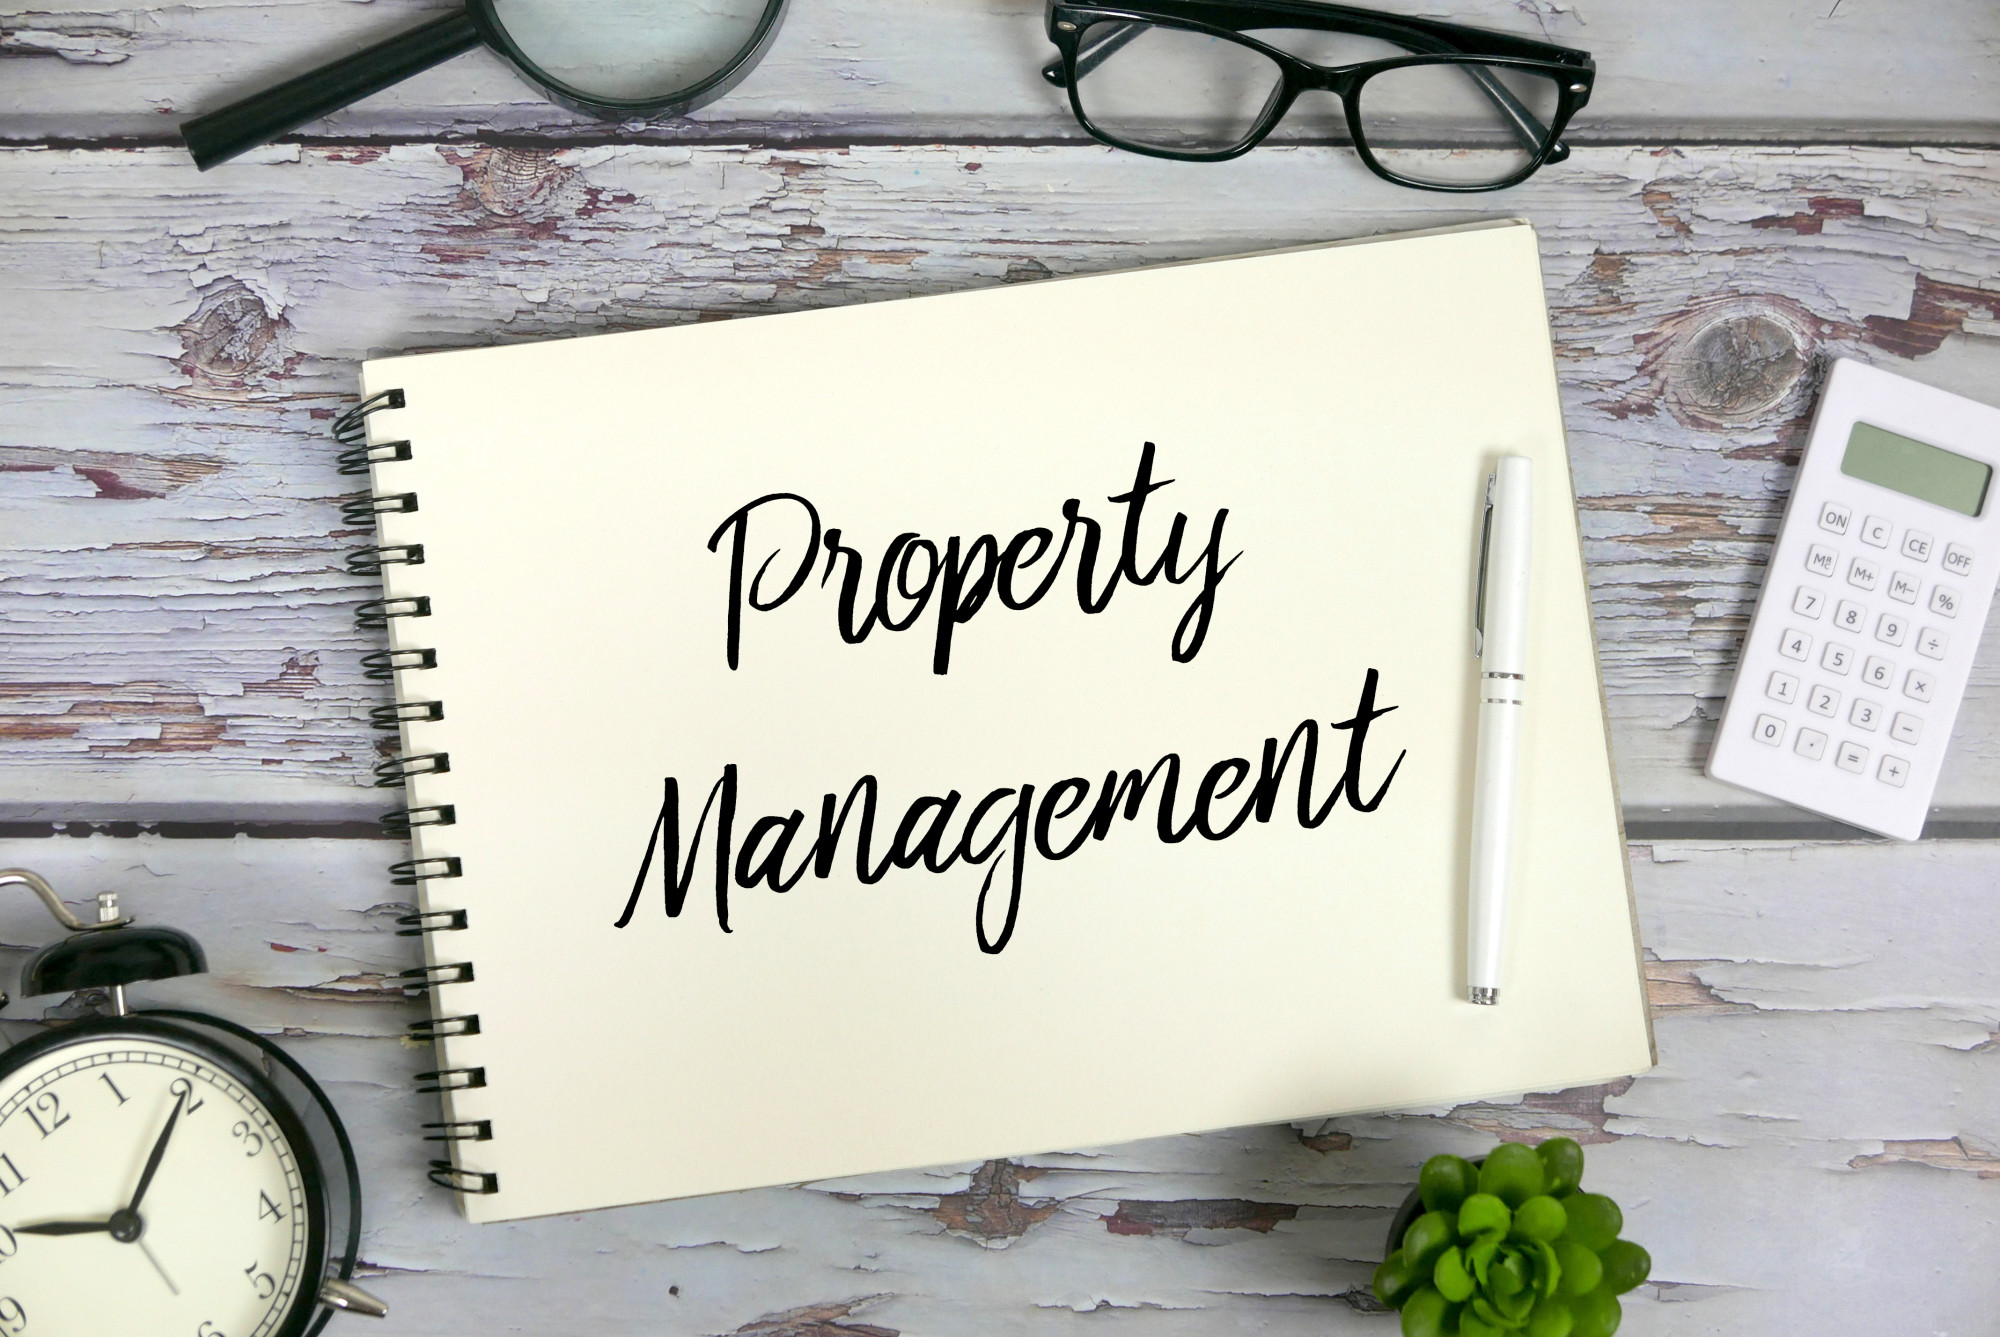 property management business